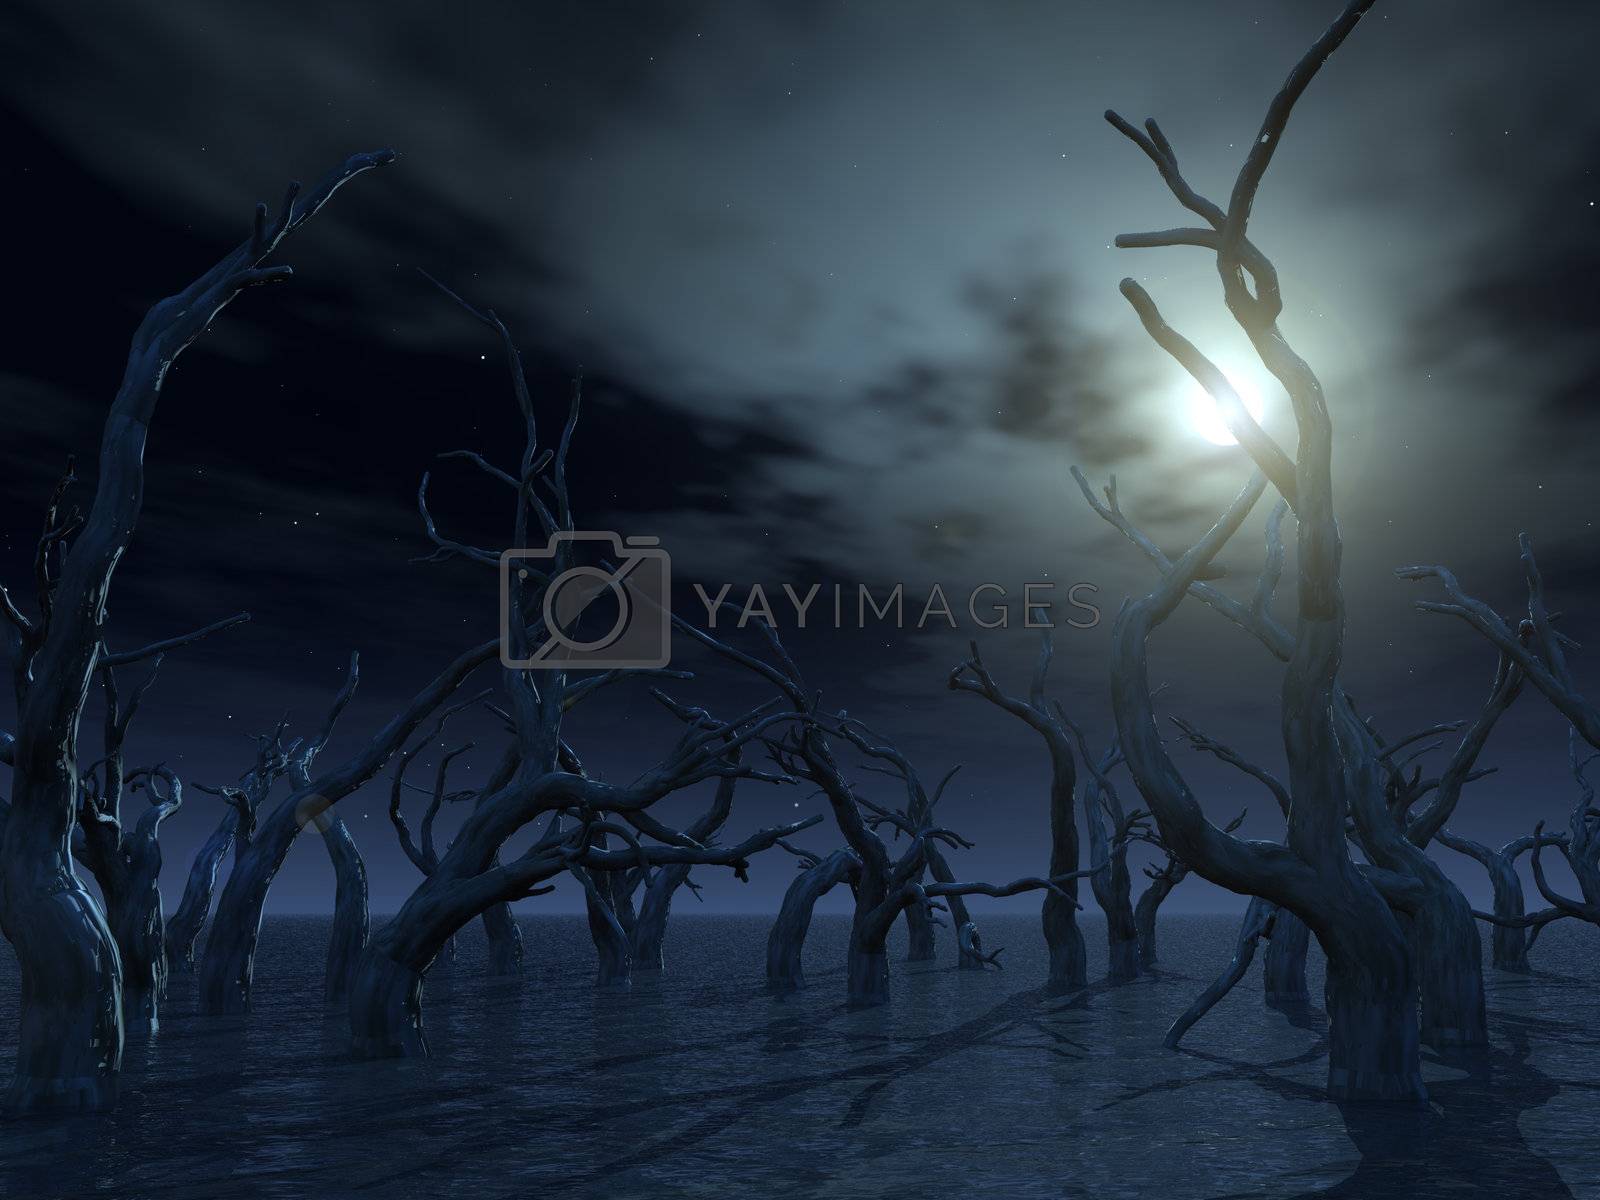 Royalty free image of dead trees by drizzd